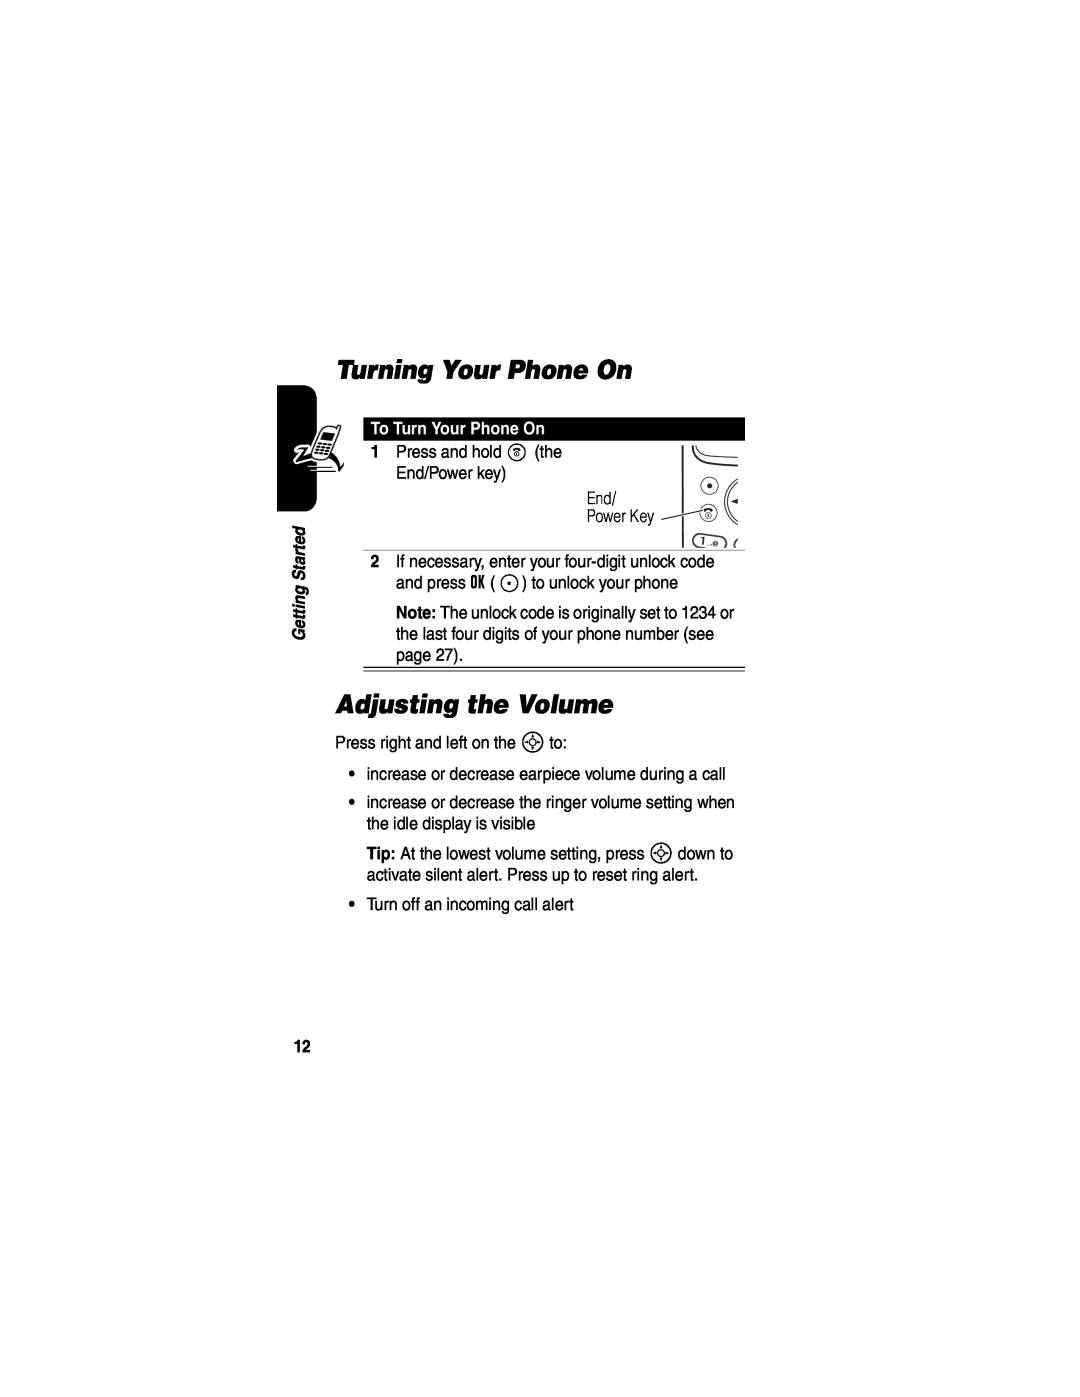 Motorola CDMA, C341a manual Turning Your Phone On, Adjusting the Volume, To Turn Your Phone On 